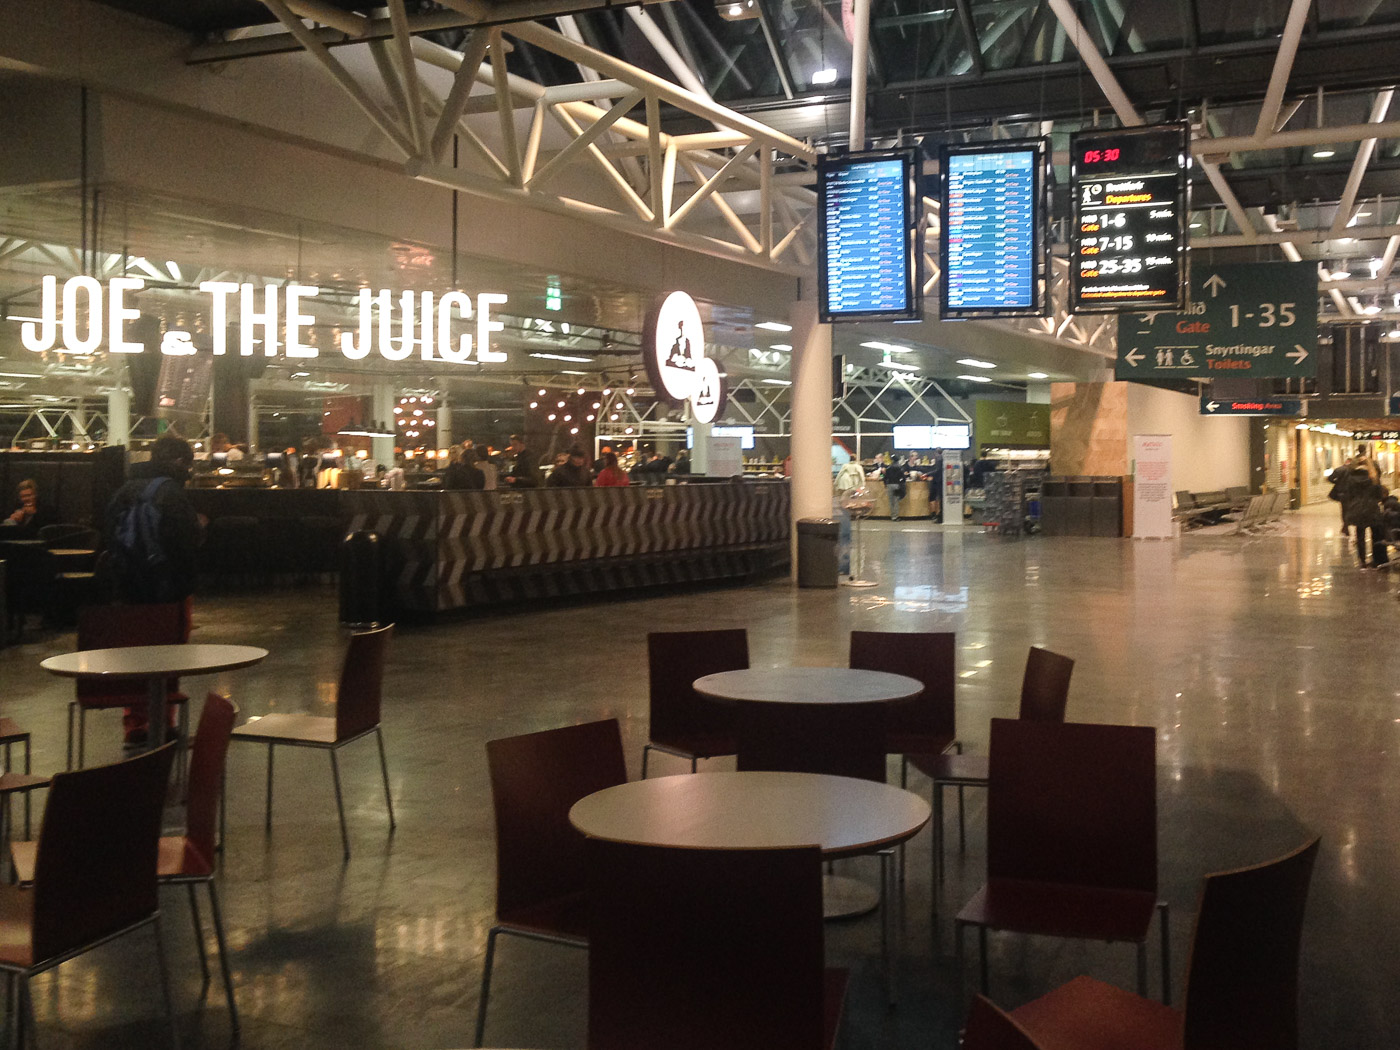 Reykjavík. Miscellaneous LXXXVI. - Keflavík Airport - a lot of changes, I dislike them. Much less space to sit/rest without having to buy something. Hmmm, also here changes to manage mass tourism! (1 till 29 April 2015)